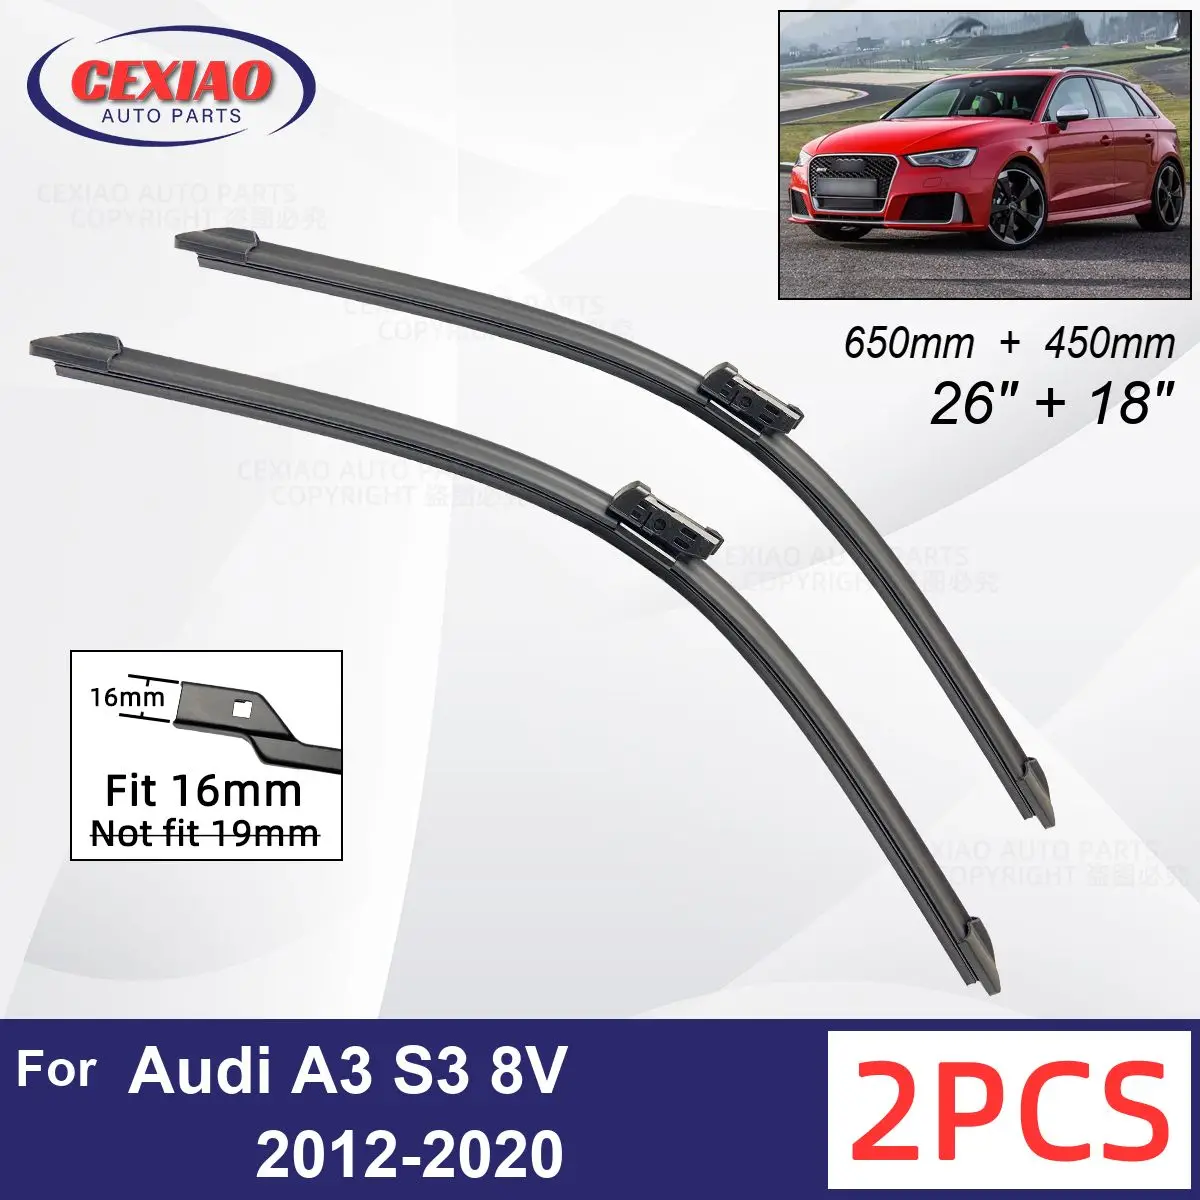 

Car Wiper For Audi A3 S3 8V 2012-2020 Front Wiper Blades Soft Rubber Windscreen Wipers Auto Windshield 26"+18" 650mm + 450mm